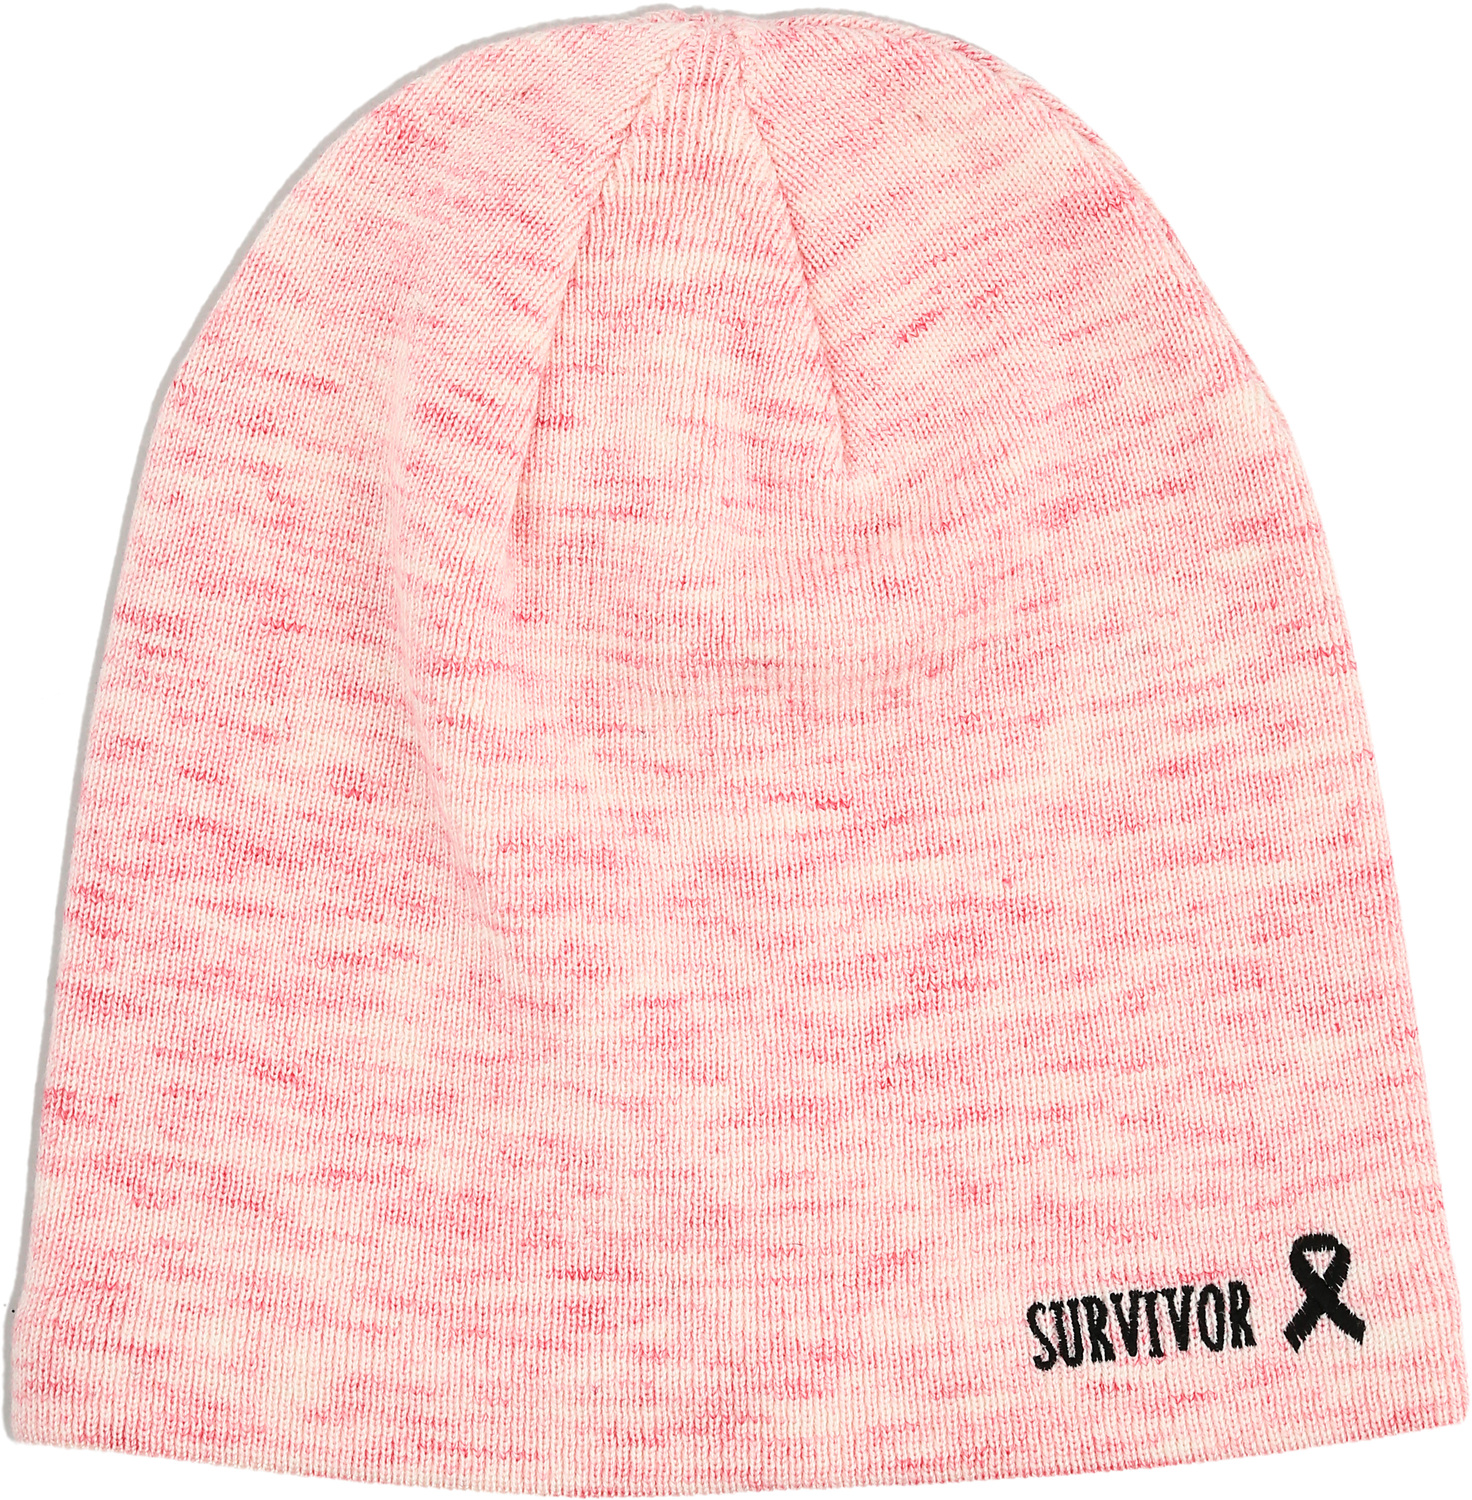 Survivor by Faith Hope and Healing - Survivor - Women's Soft Cotton Lined Knitted Beanie